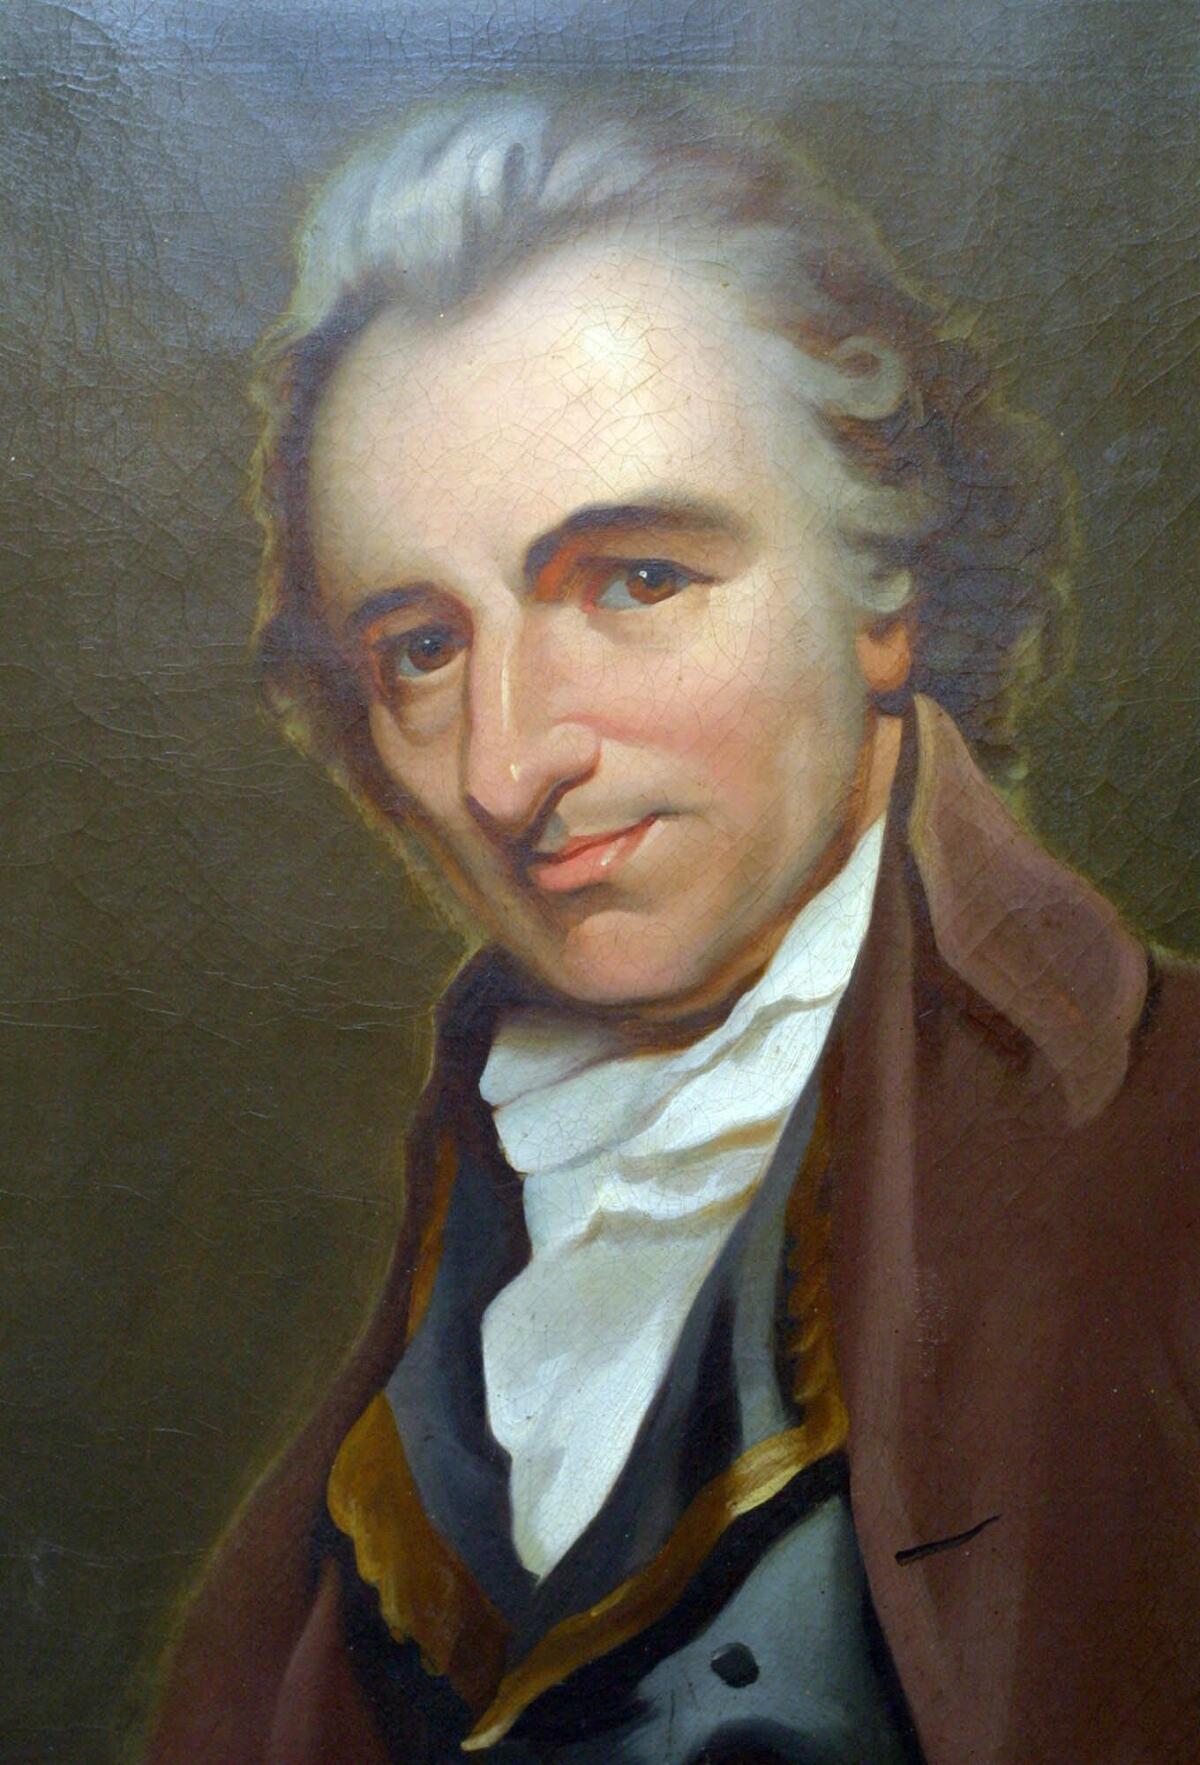 A portrait of Thomas Paine, whose 1776 pamphlet "Common Sense" helped dream the American experiment into being.